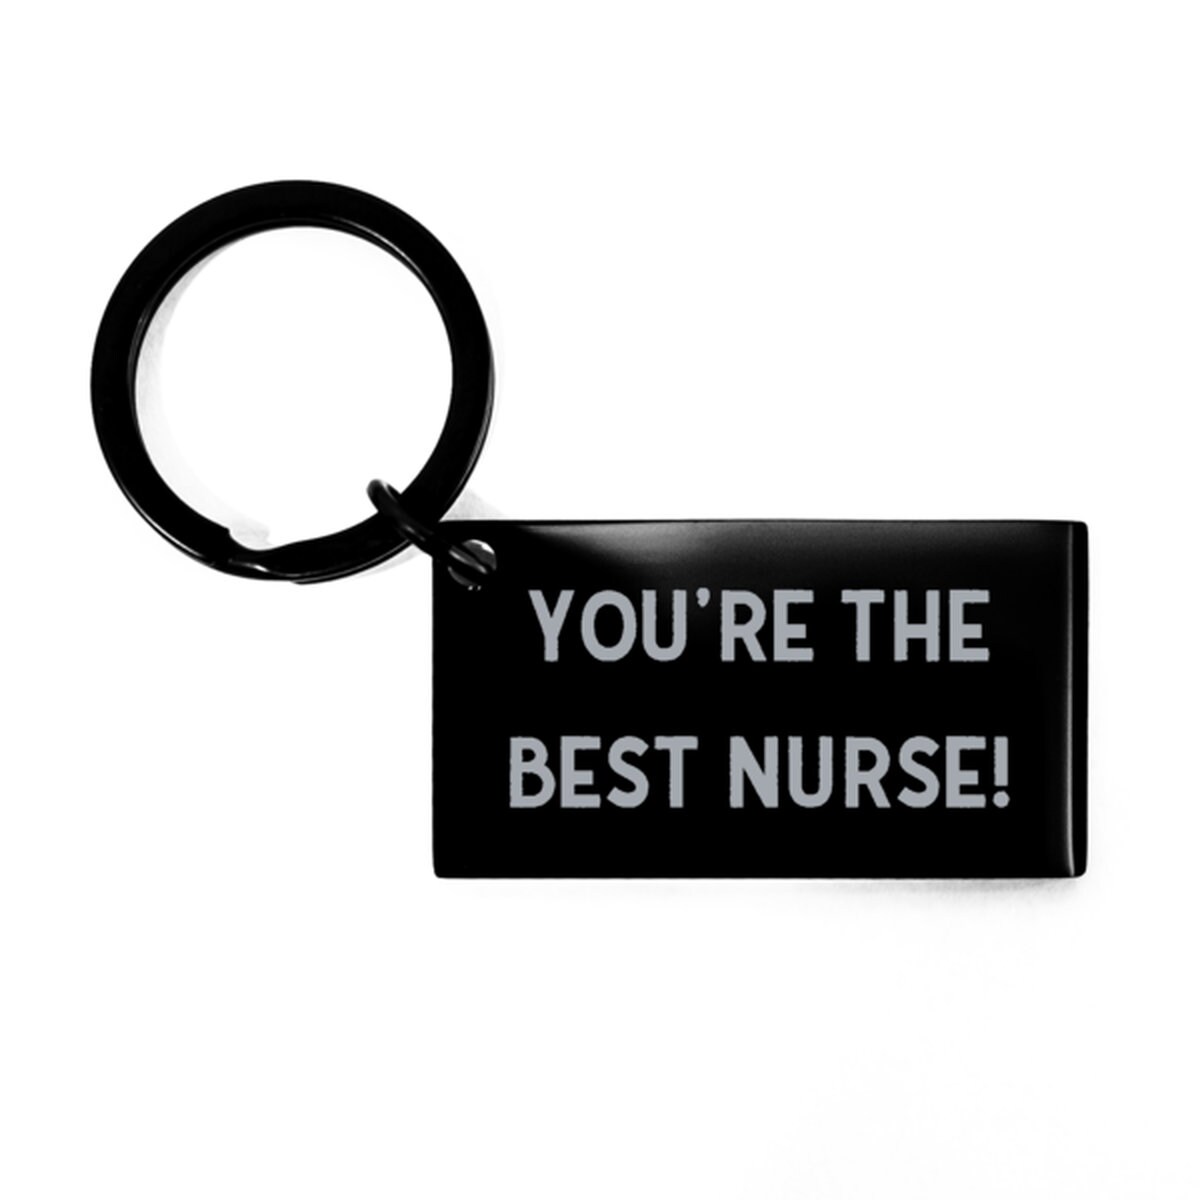 Funny Nurse Appreciation Gift Keychain, You're The Best Nurse, Gifts For Coworkers, ER Nurse Gift, Nurse Birthday Gift From Co Workers etsy.me/45BsxCf #nursekeychain #giftsforcoworkers #coworkerskeychain #giftsfromfriends #fancynurse #nursegraduation #graduatio